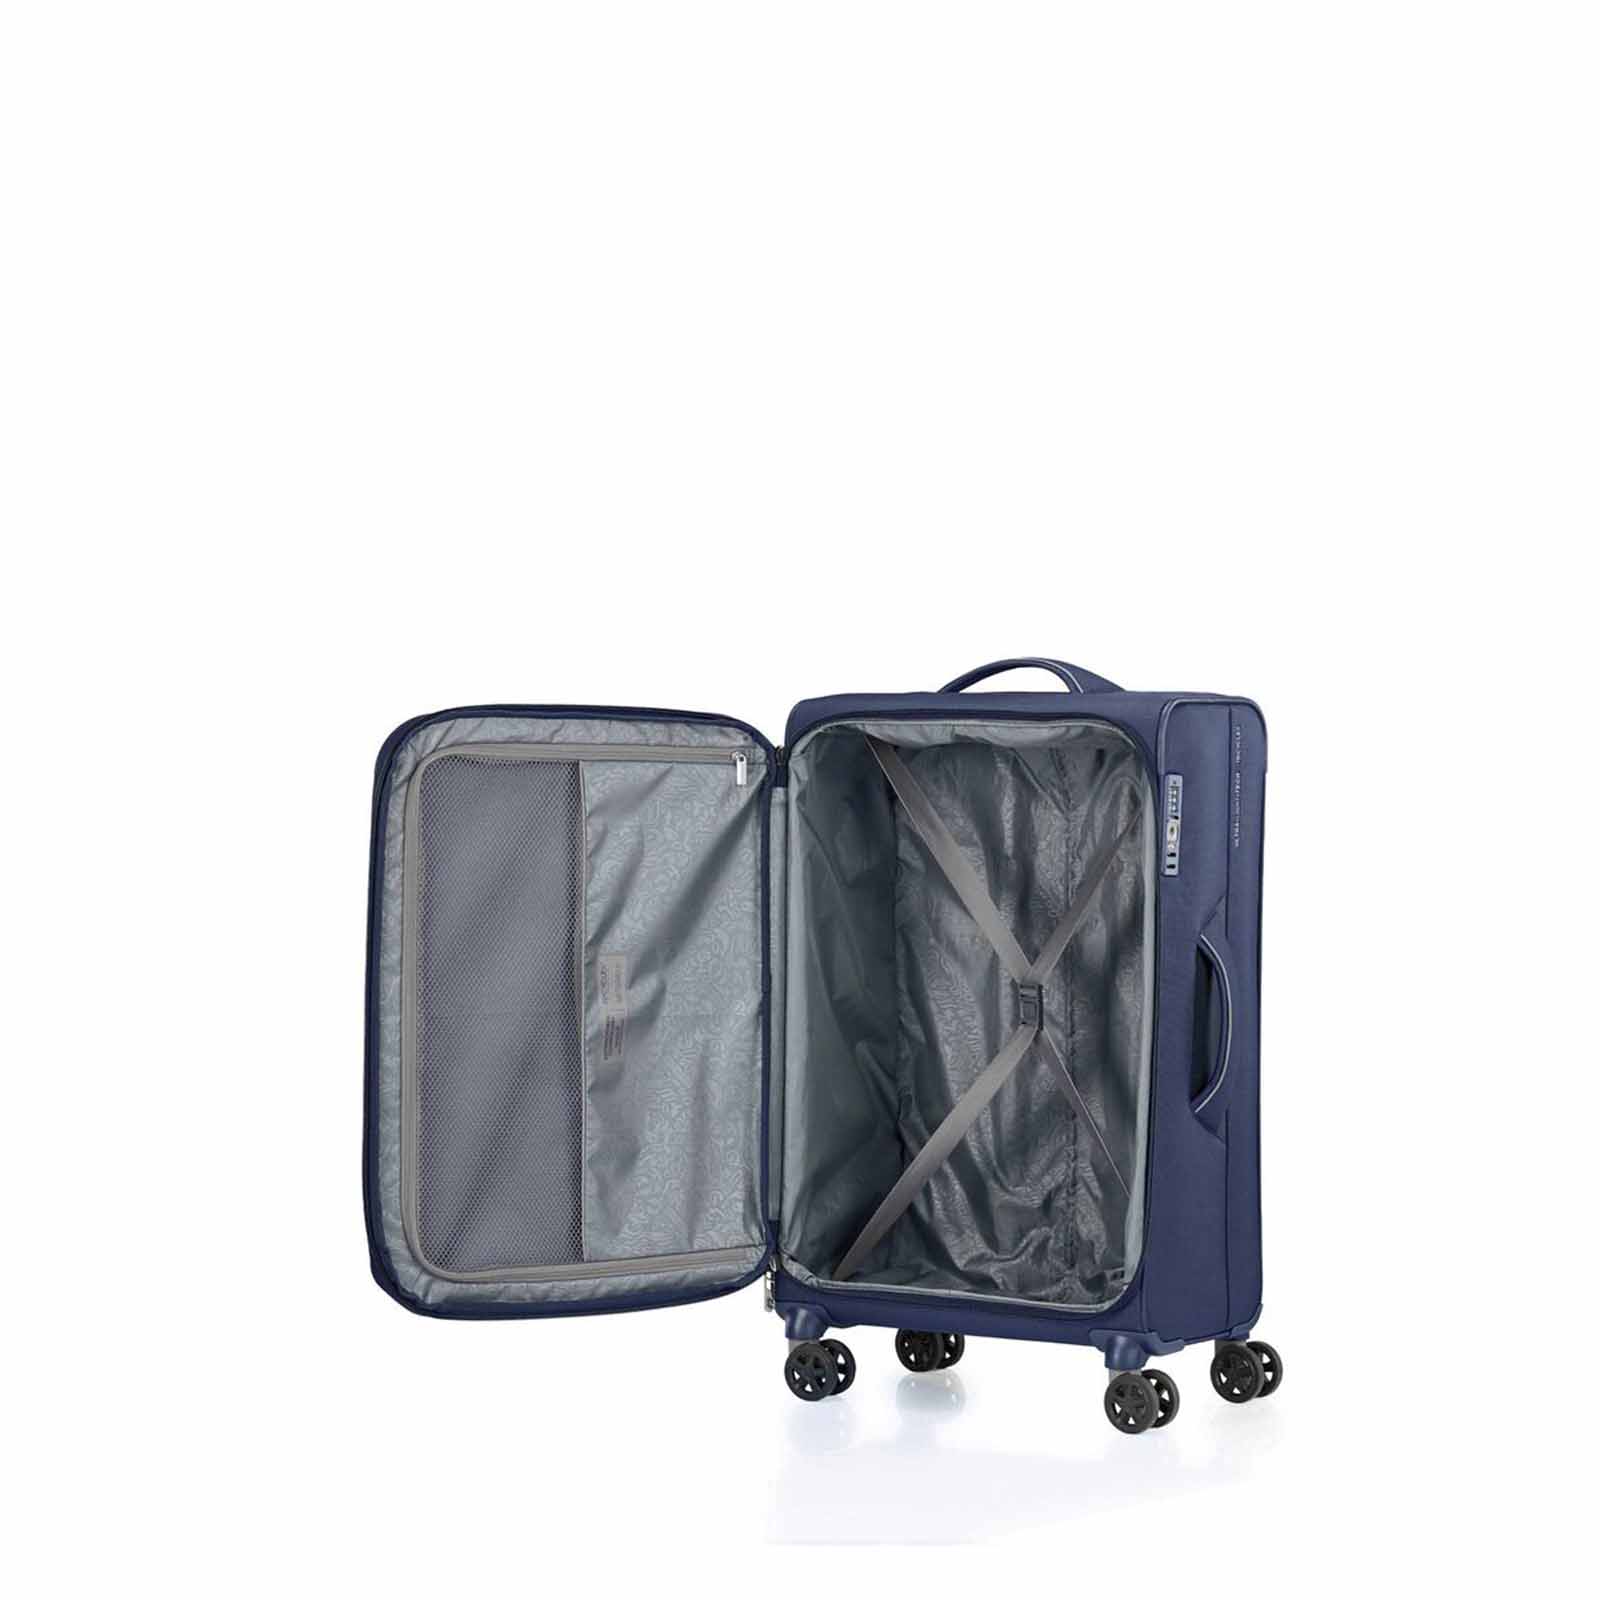 American Tourister Applite 4 Eco 71cm Suitcase Navy